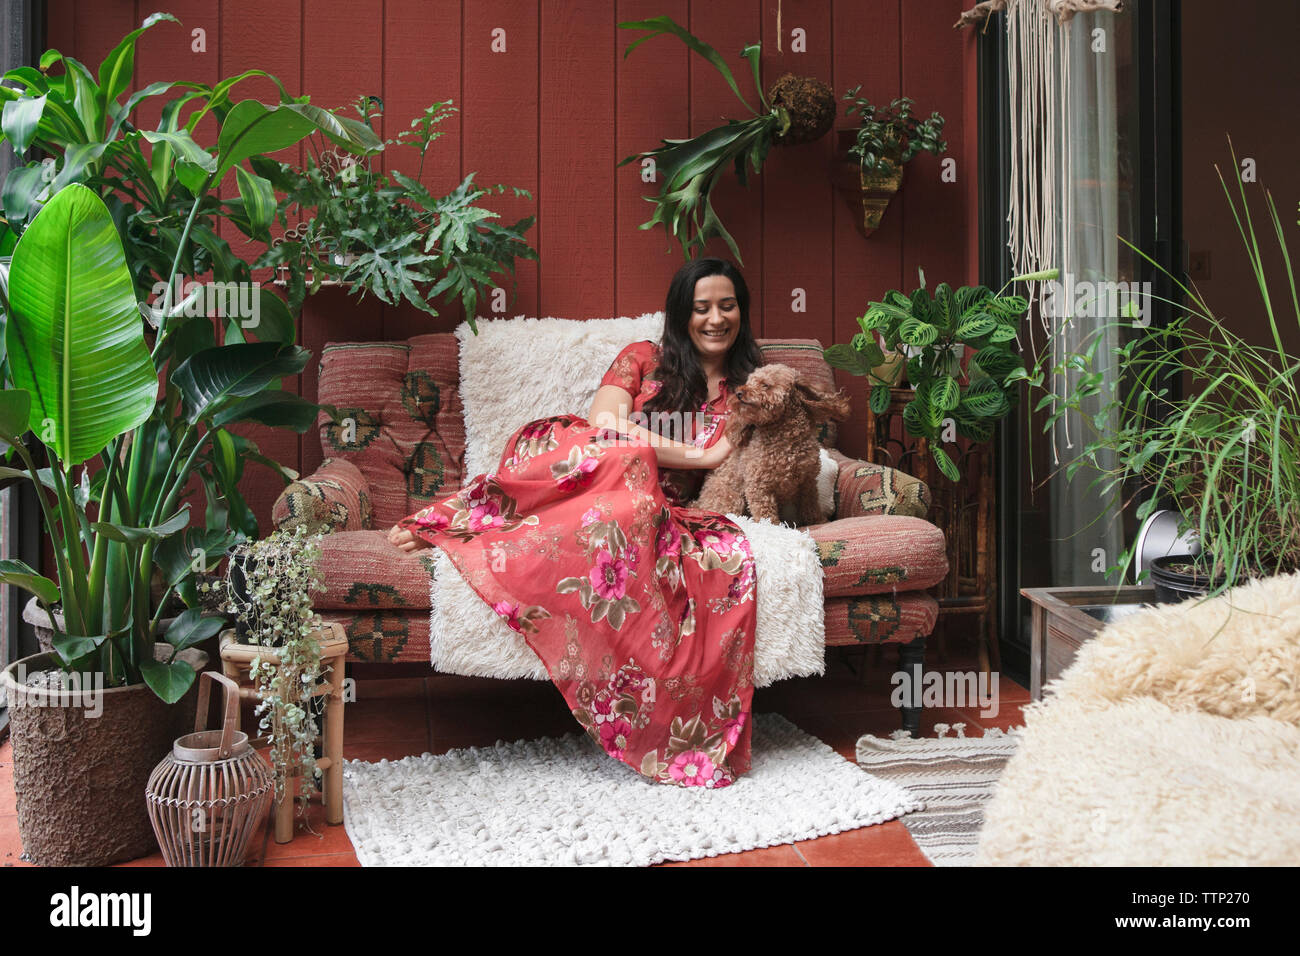 Smiling young woman with poodle resting on sofa amidst potted plants at porch Stock Photo